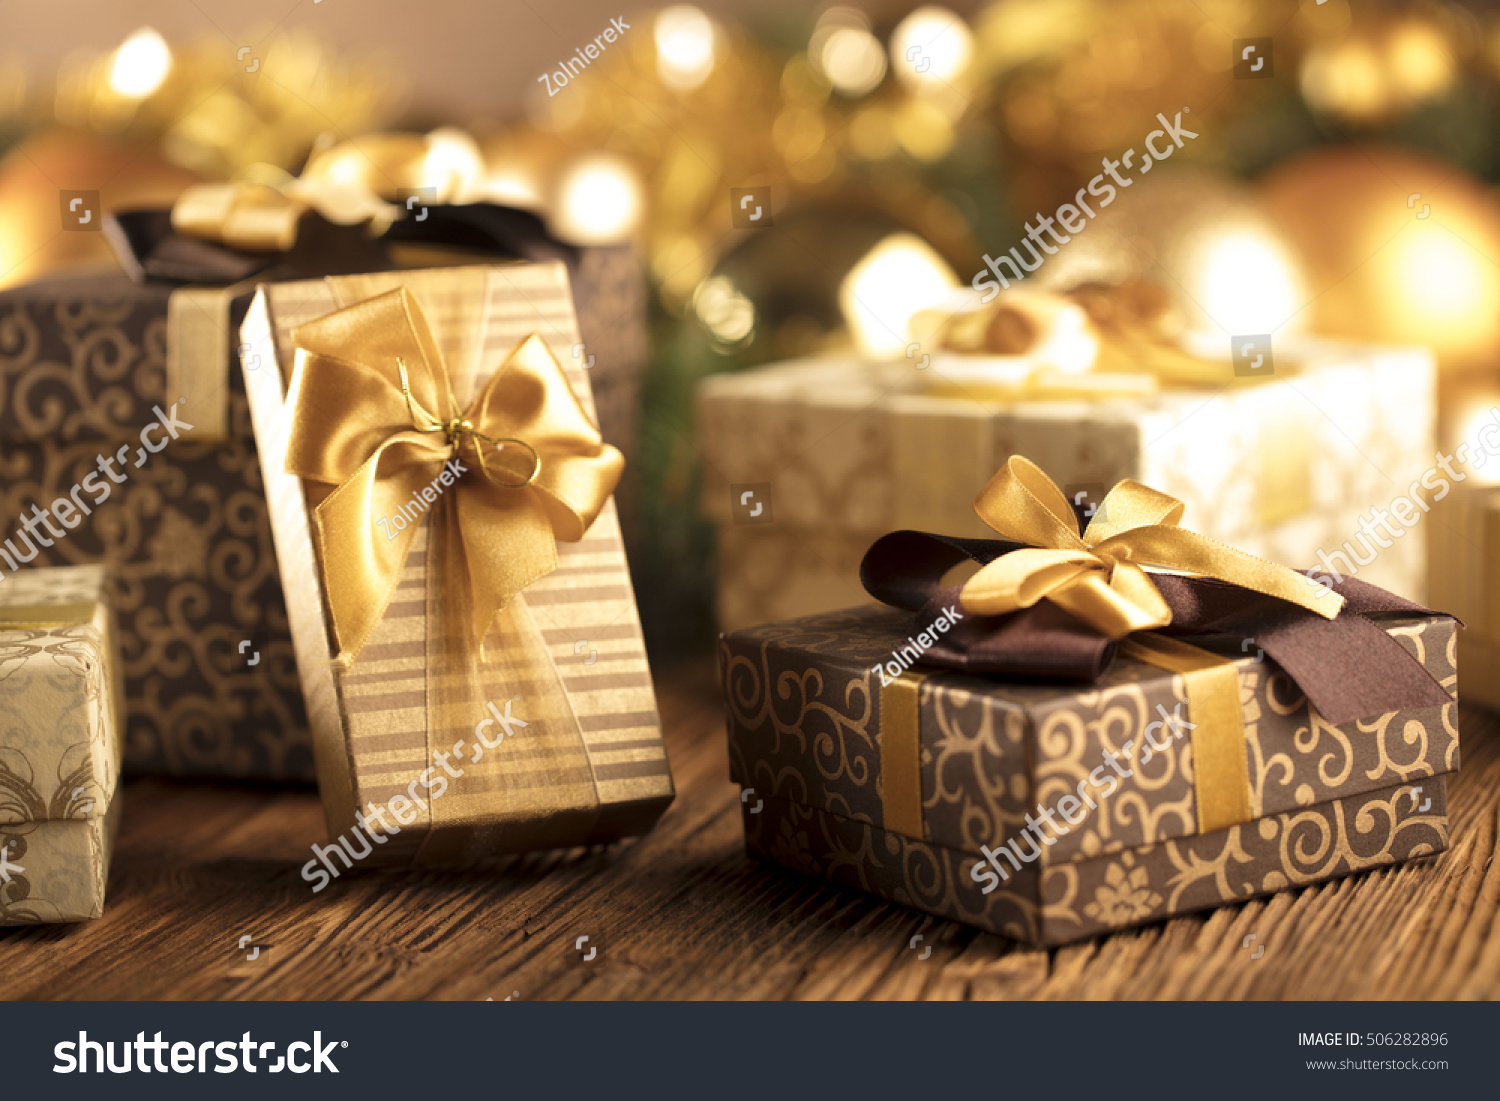 Aesthetic Christmas Pictures Presents - Largest Wallpaper Portal